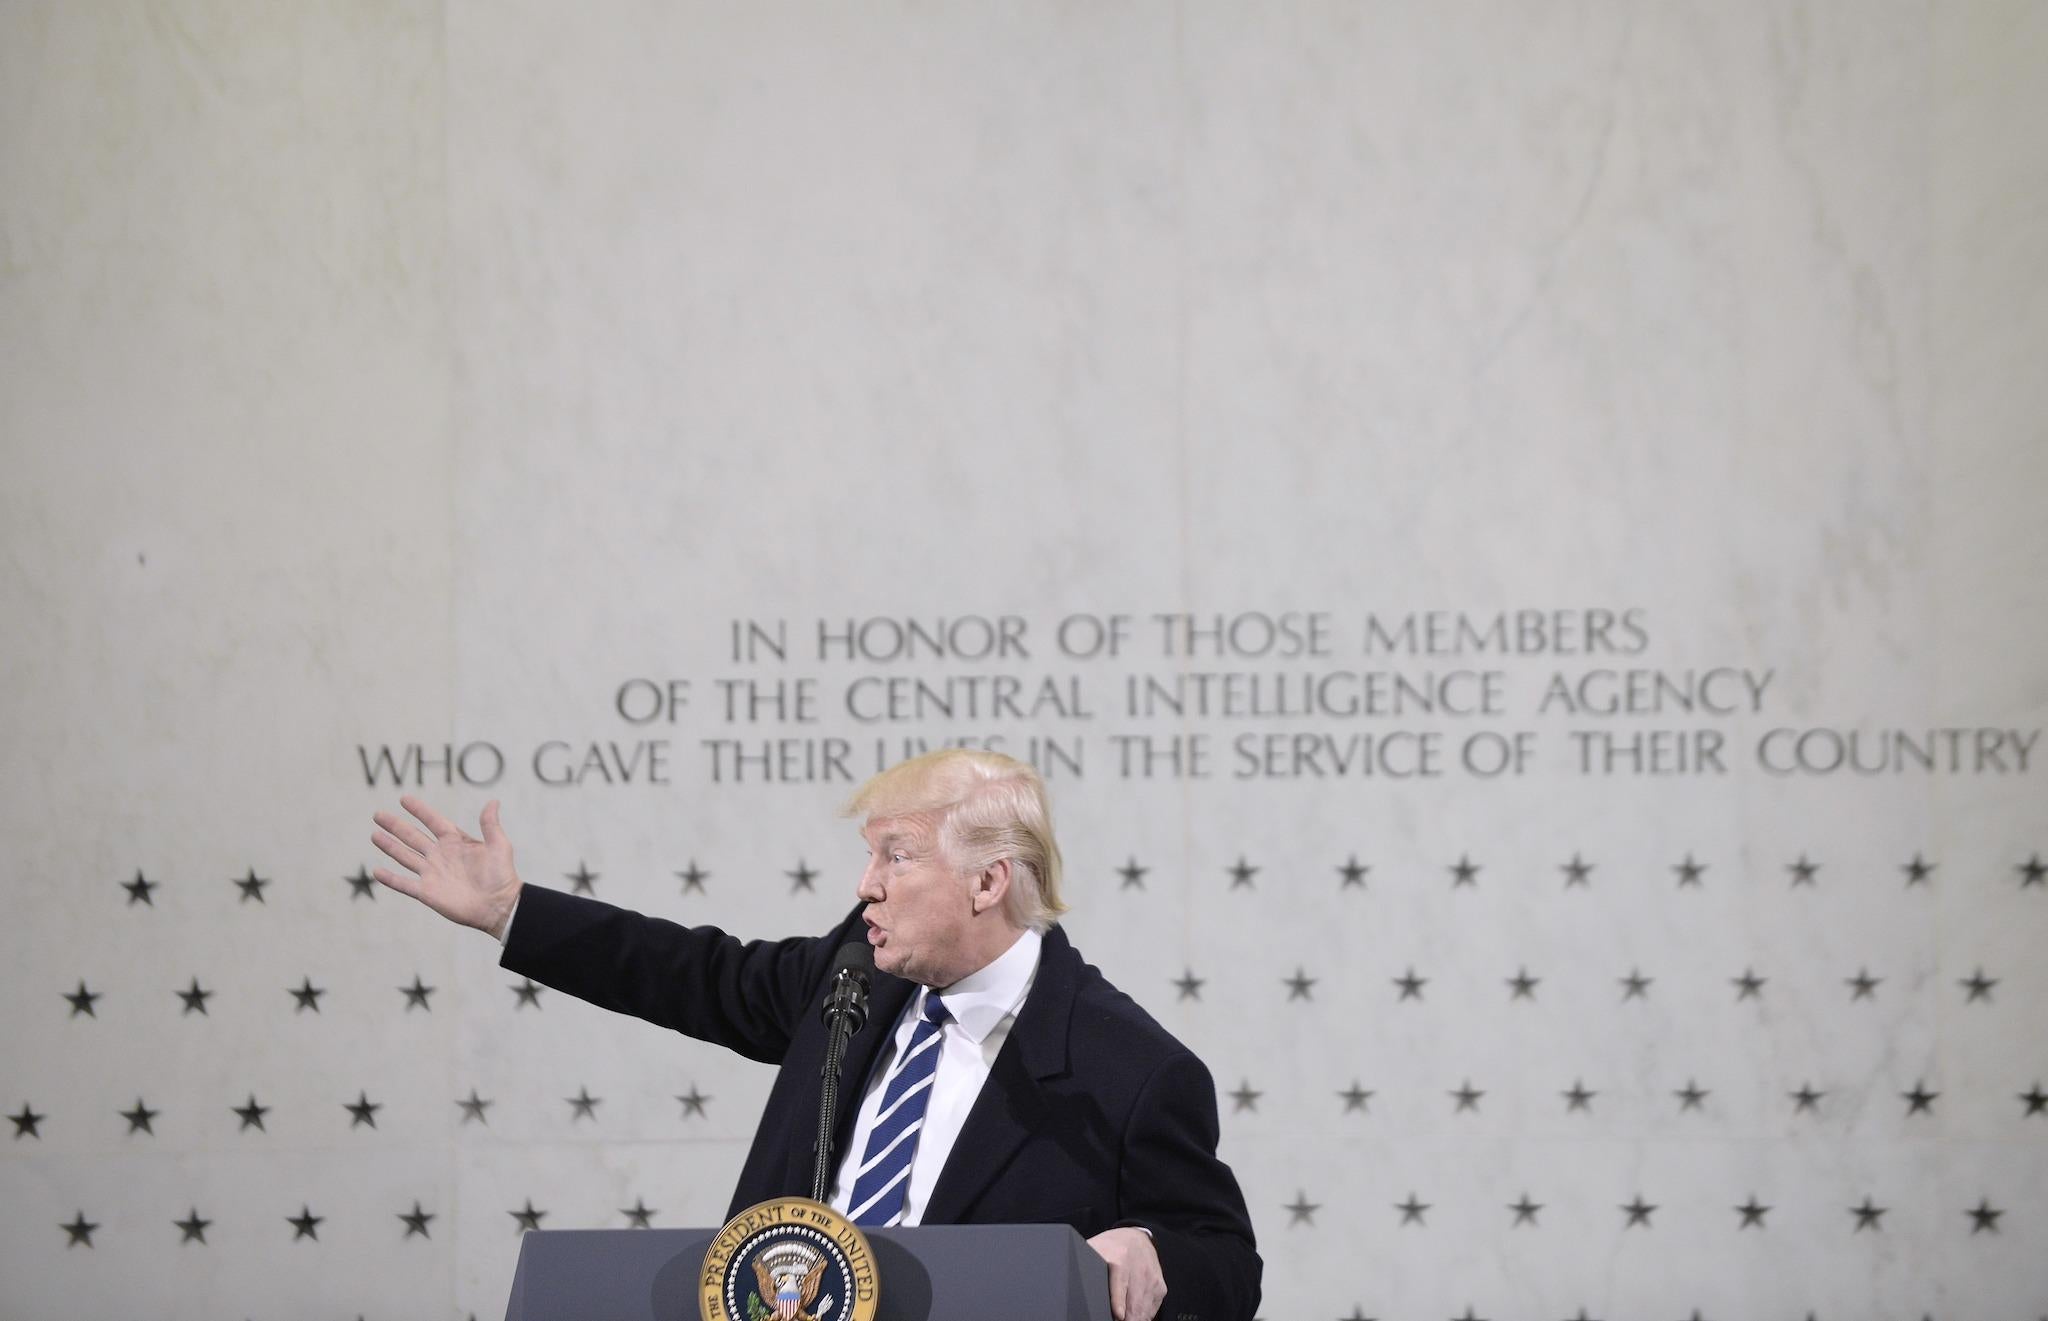 US President Donald Trump speaks at the CIA headquarters on January 21, 2017 in Langley, Virginia